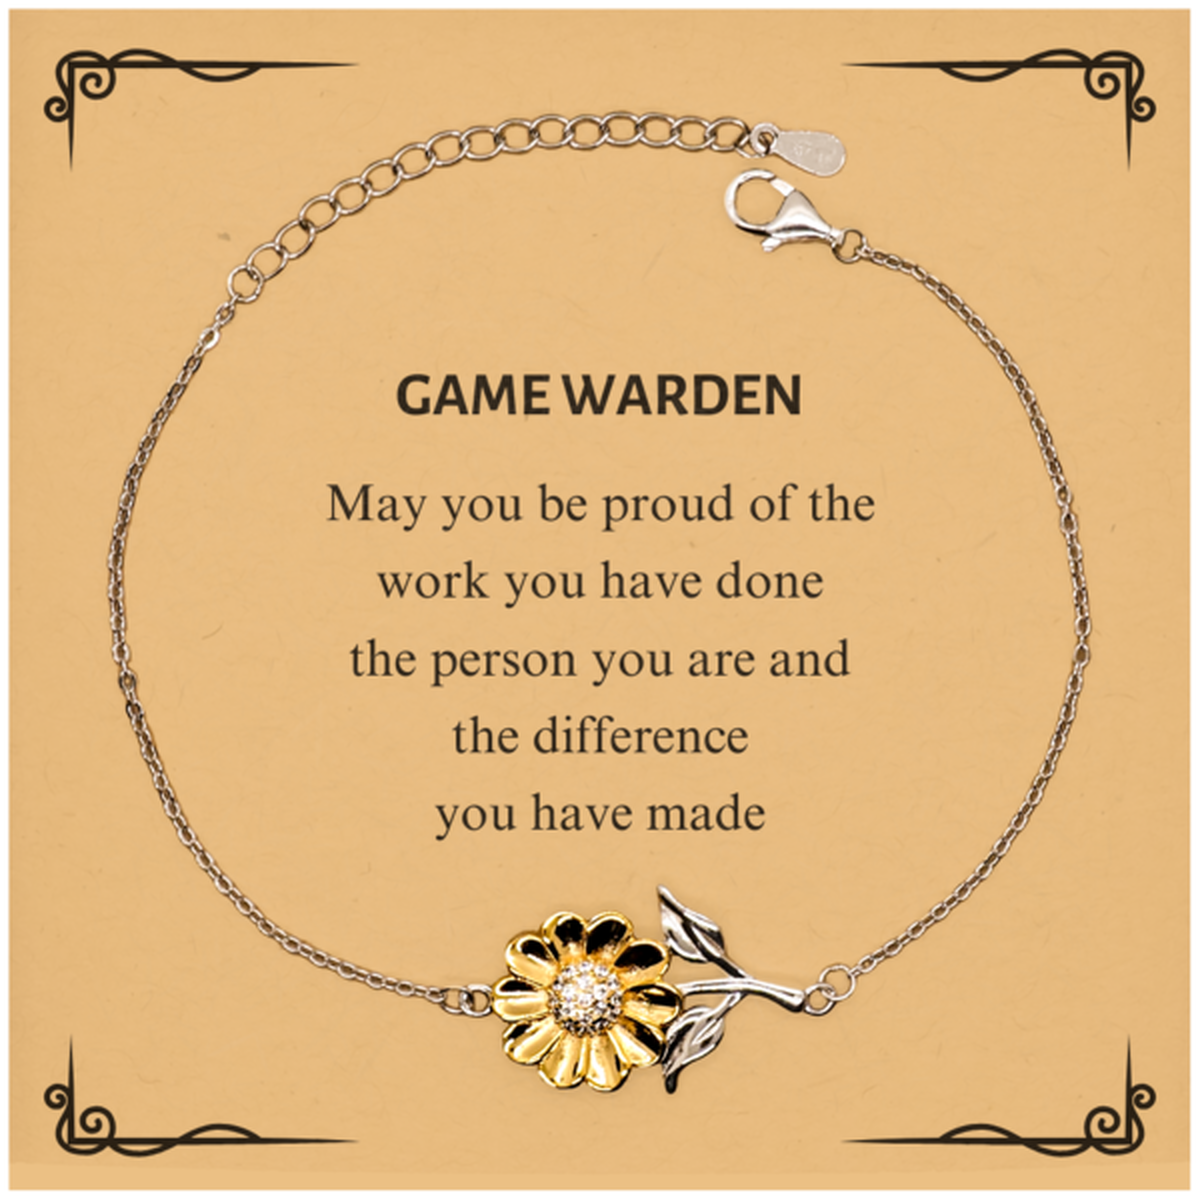 Game Warden May you be proud of the work you have done, Retirement Game Warden Sunflower Bracelet for Colleague Appreciation Gifts Amazing for Game Warden